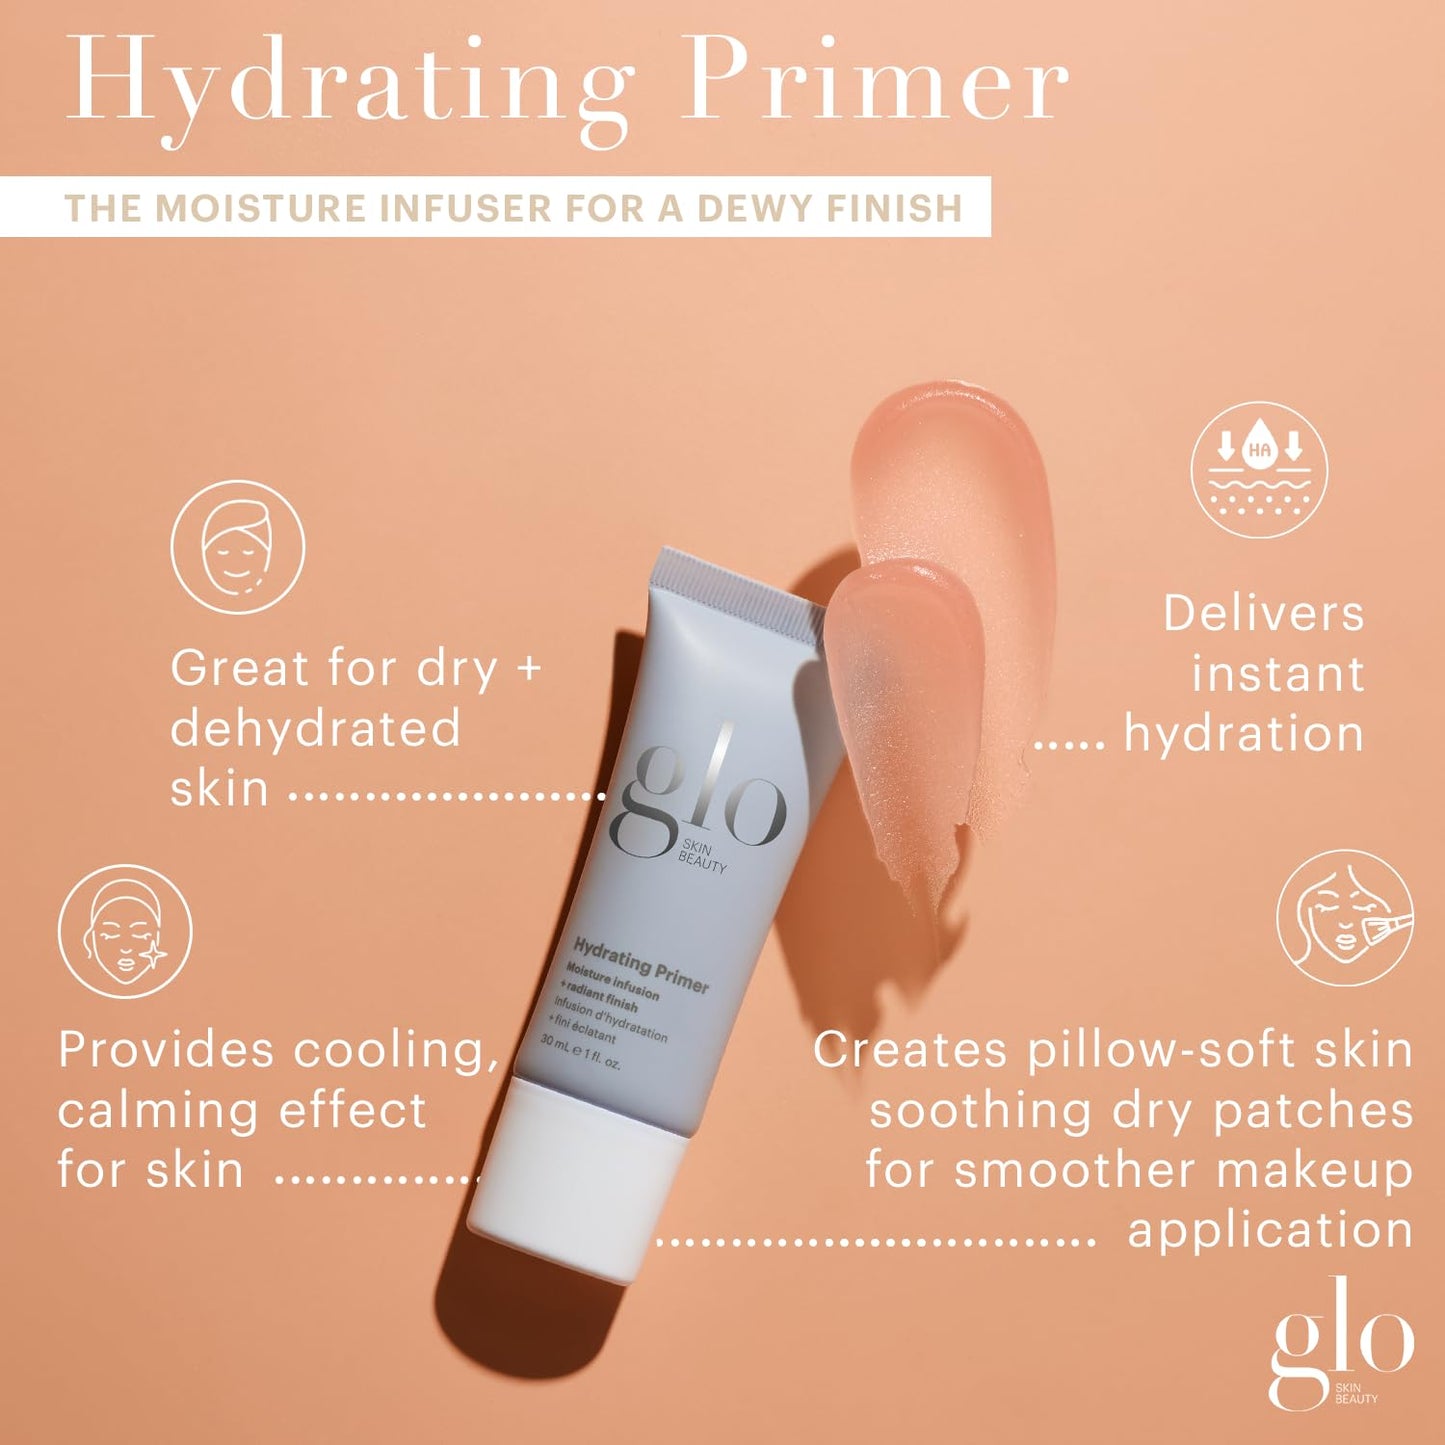 Glo Skin Beauty Hydrating Primer with Hyaluronic Acid - Replenish Moisture and Plump Skin for Smoother Makeup Application, for Dry + Dehydrated Skin, Dewy Finish